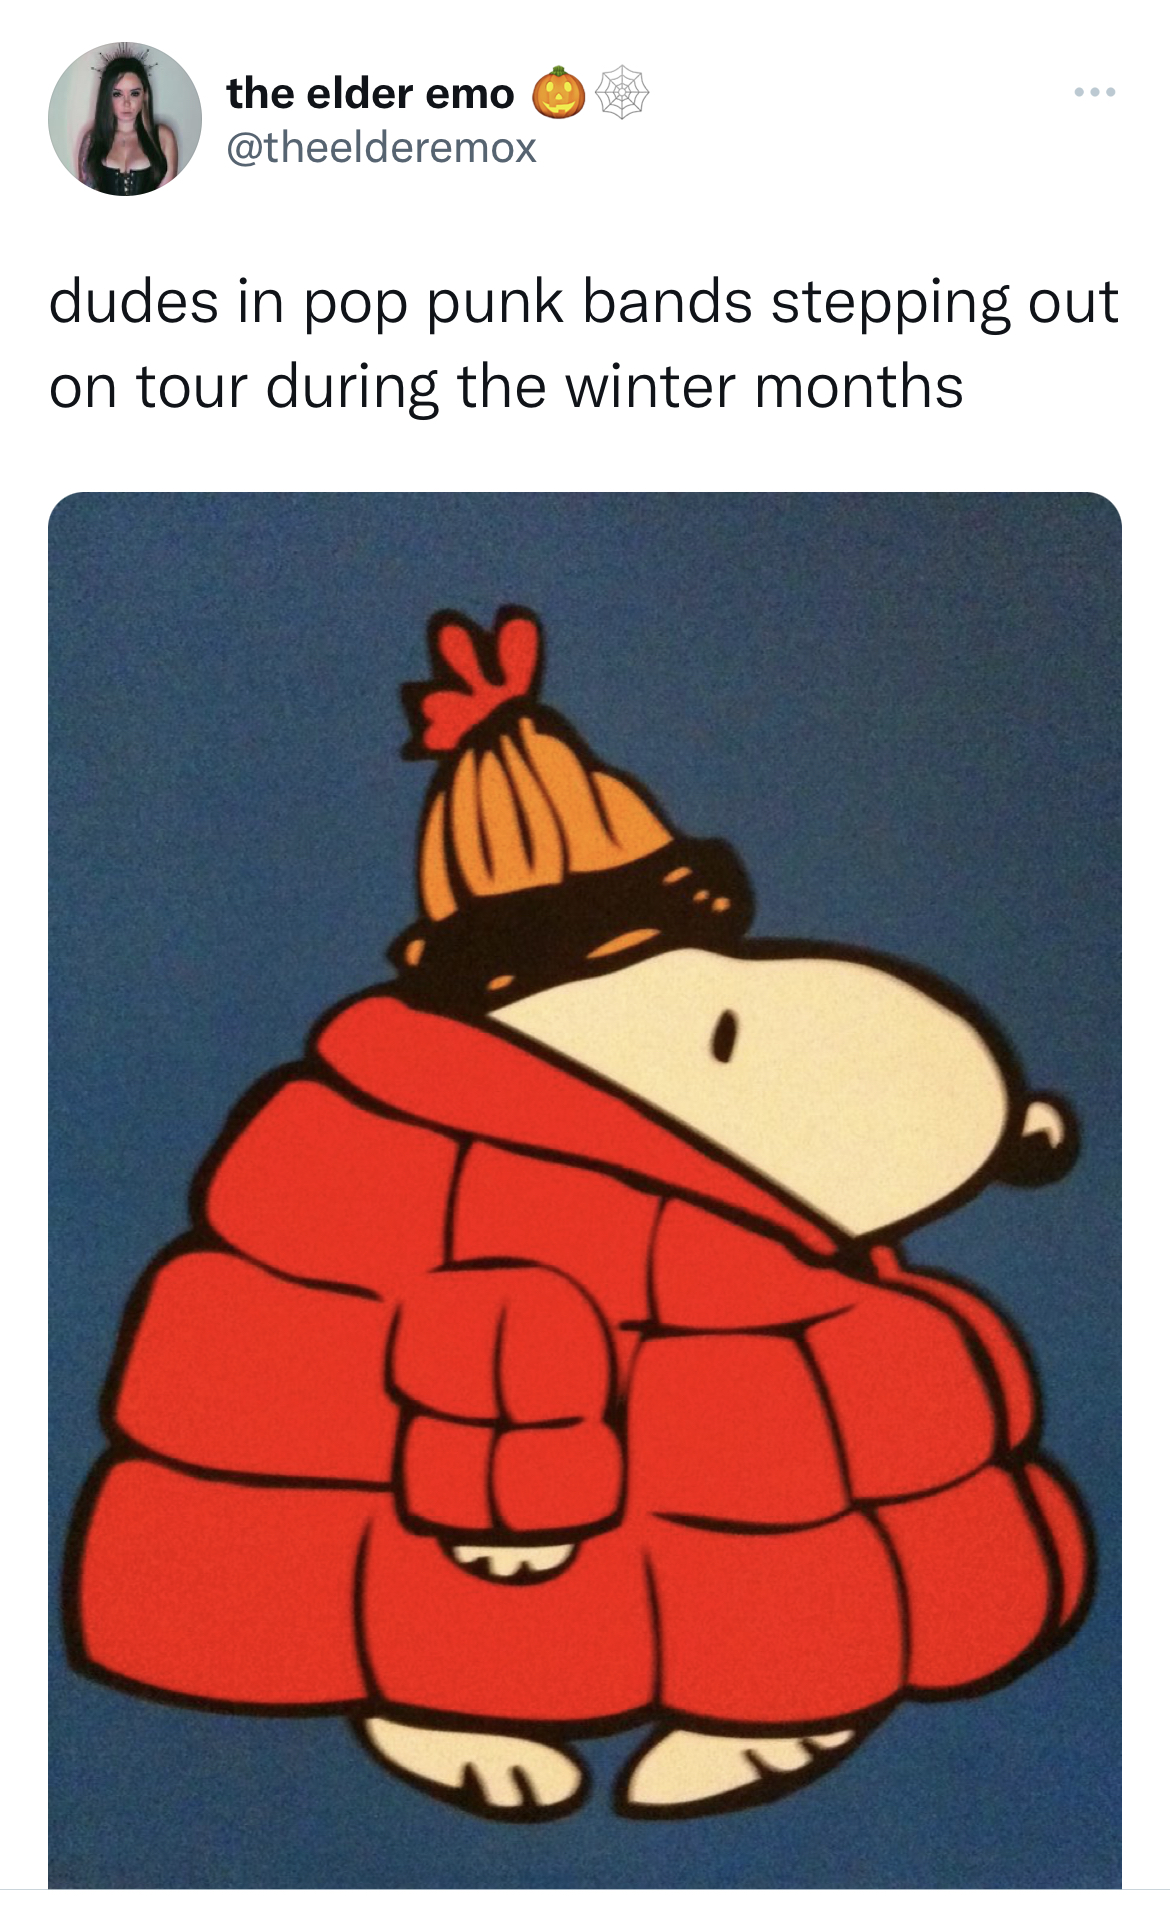 Tweets of the week - snoopy winter coat - the elder emo dudes in pop punk bands stepping out on tour during the winter months